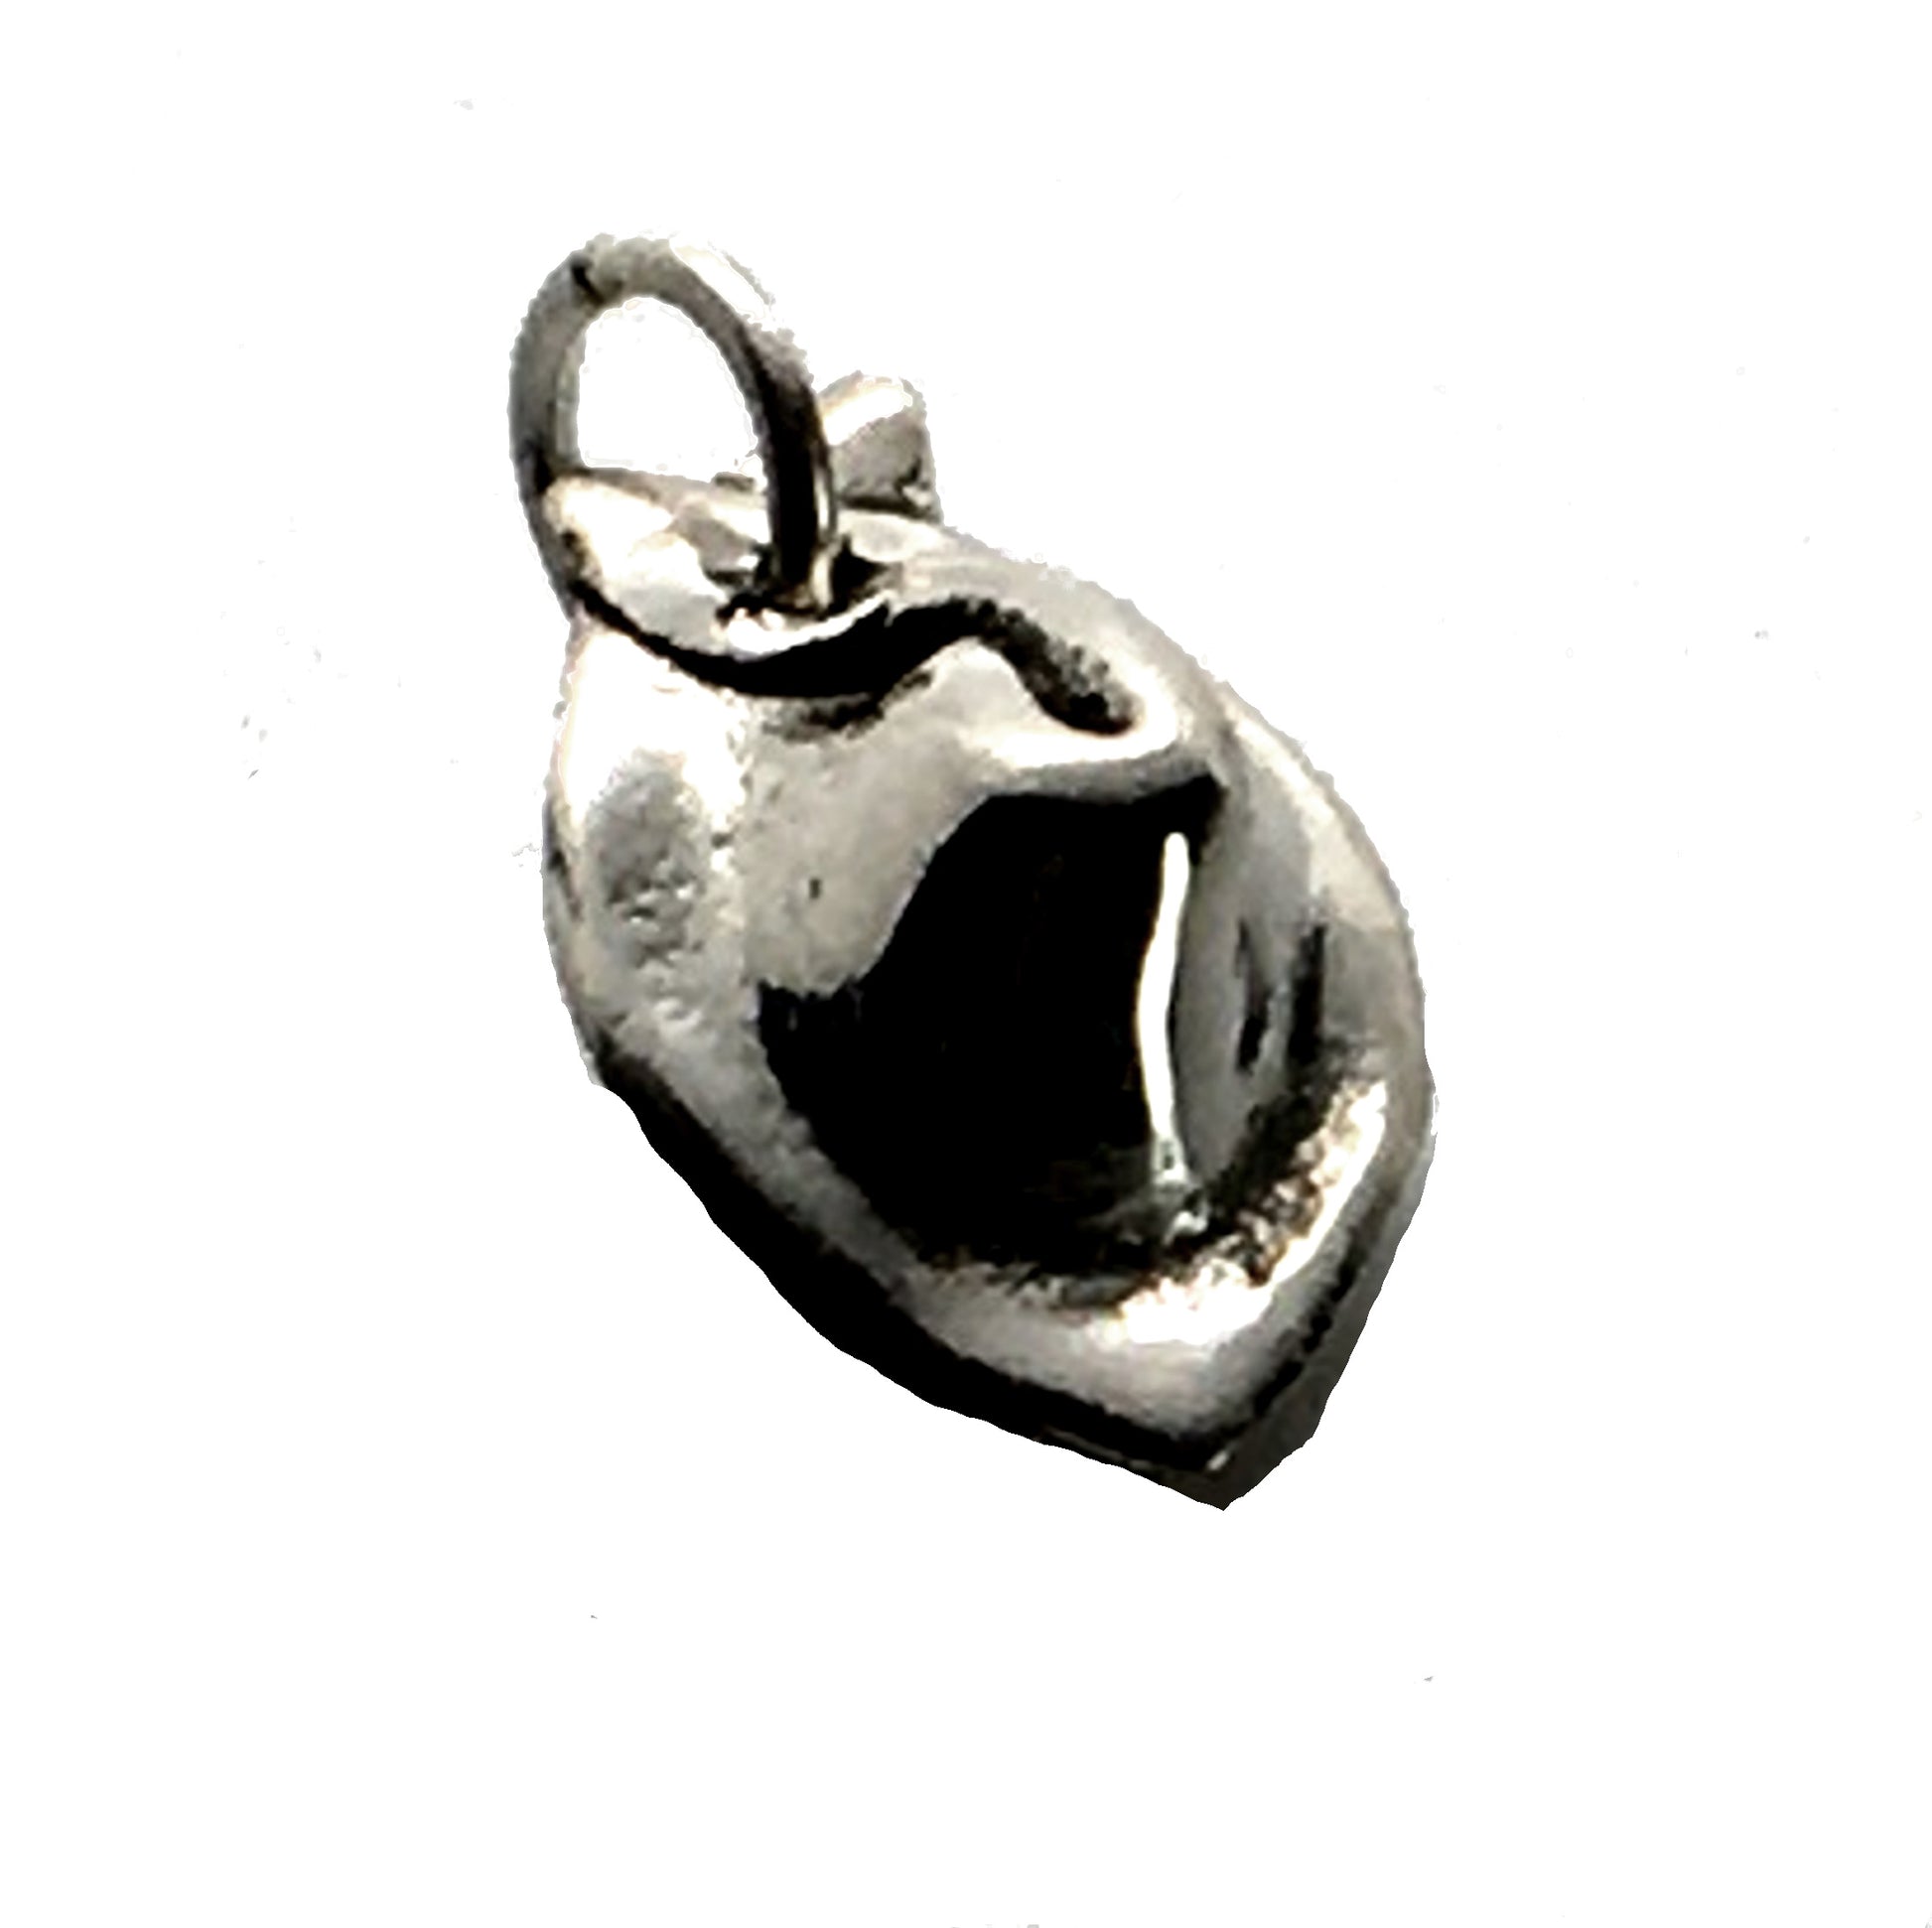 wonton charm or pendant in sterling silver